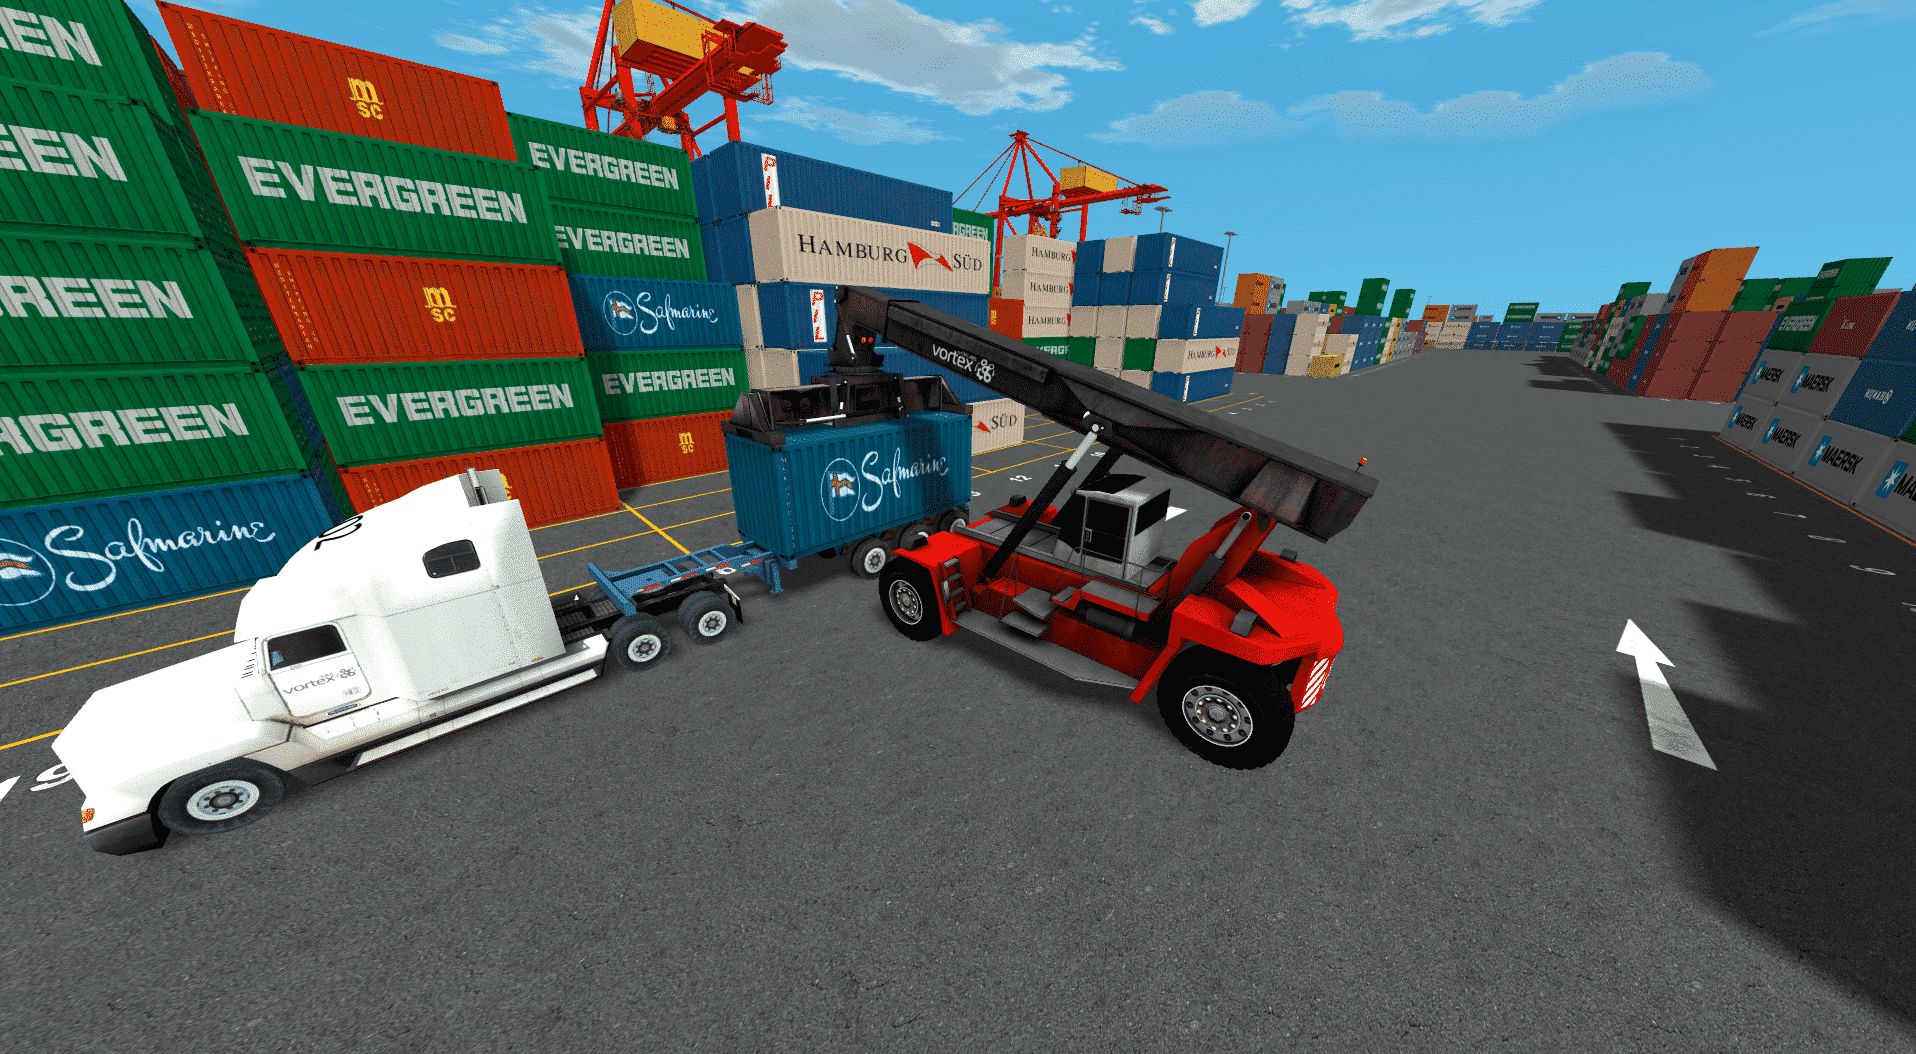 Reachstacker Simulator Training Pack – Picking up a container _2014-min